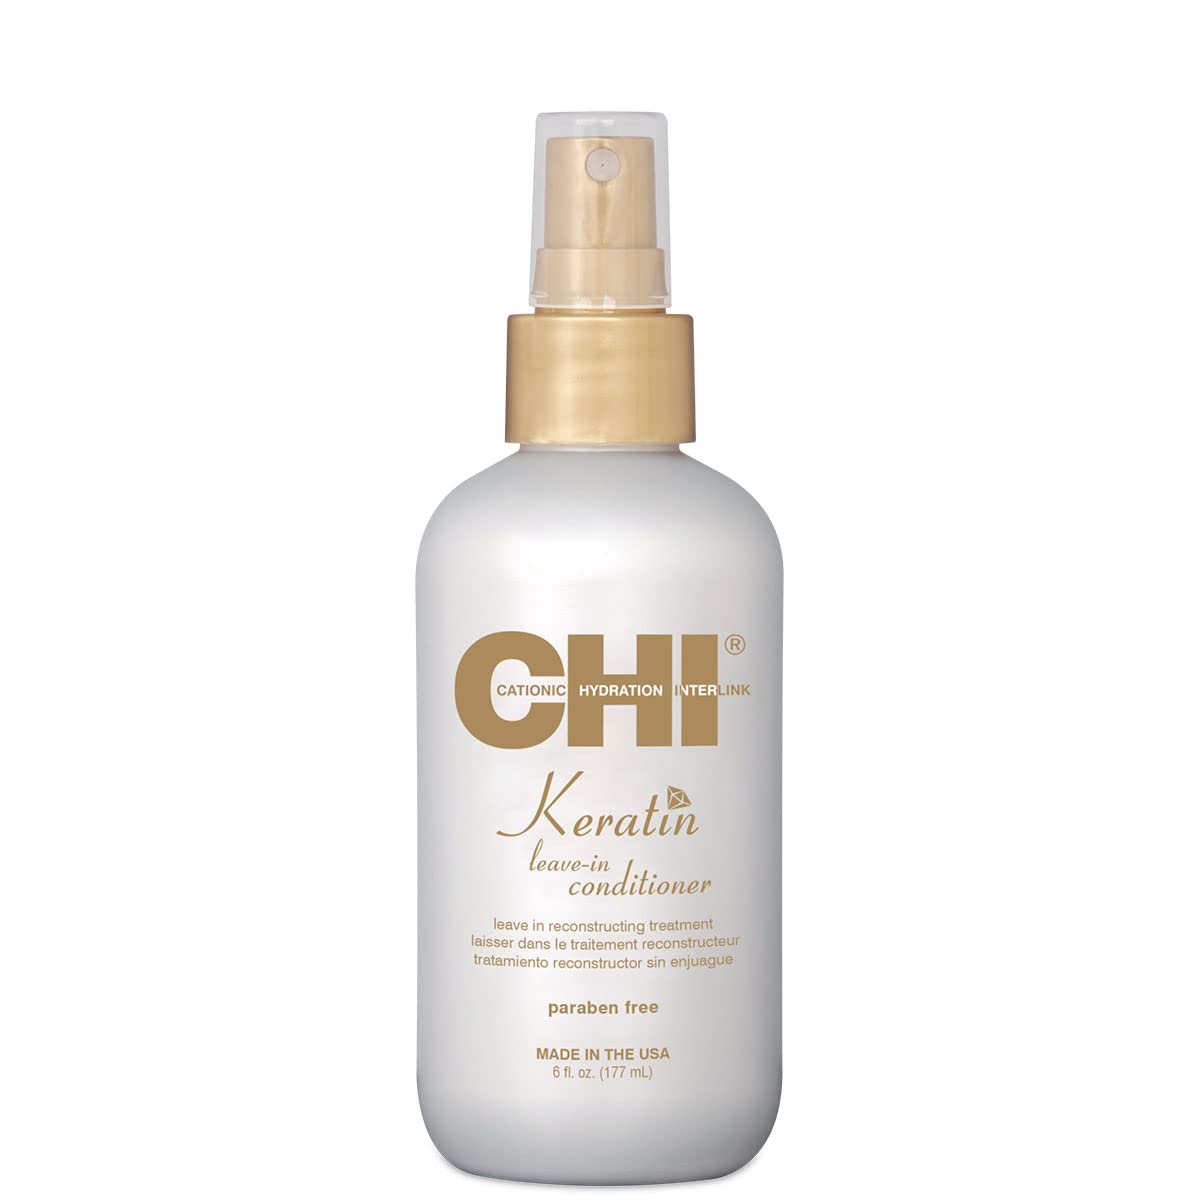 keratin leave in conditioner detailed review